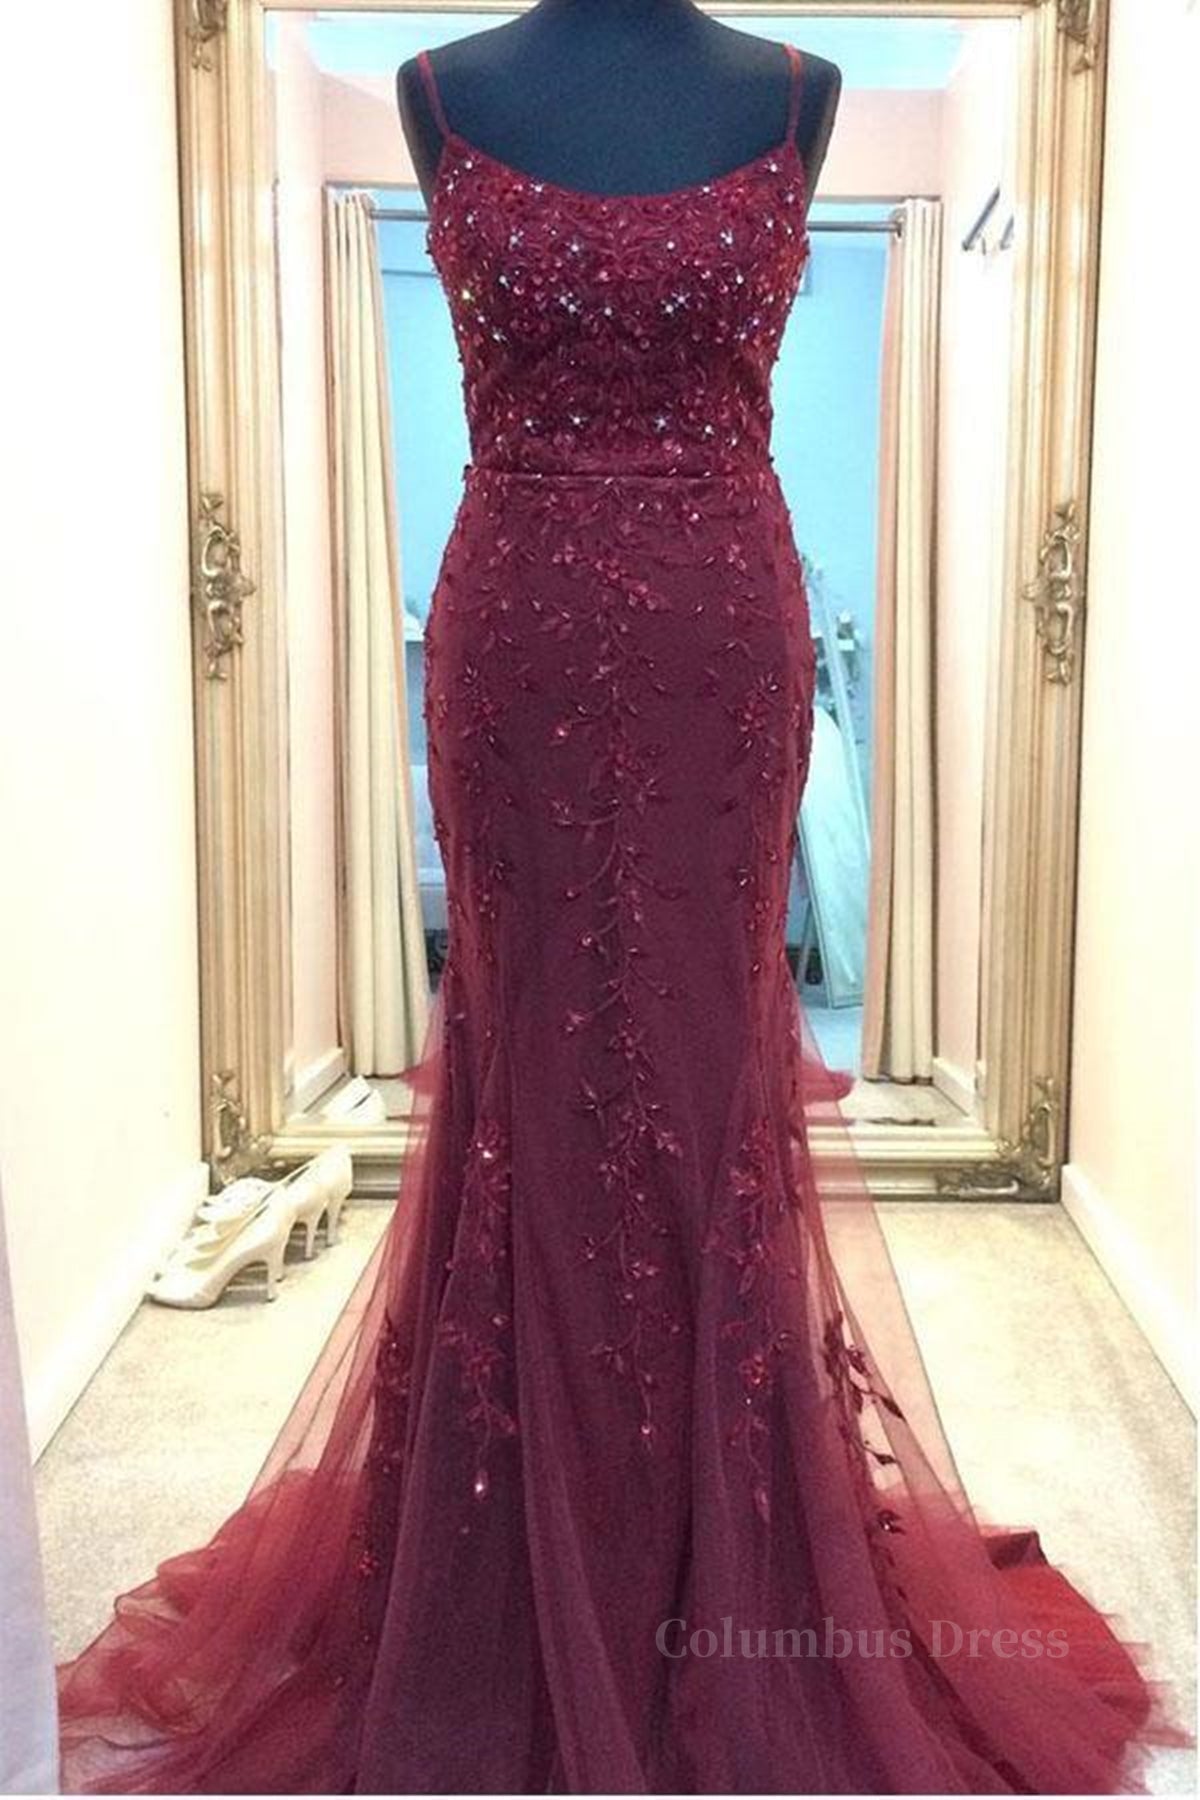 Backless Mermaid Beaded Maroon Lace Long Corset Prom Dresses, Backless Burgundy Lace Corset Formal Dresses, Burgundy Tulle Evening Dresses outfit, Formal Dresses For Winter